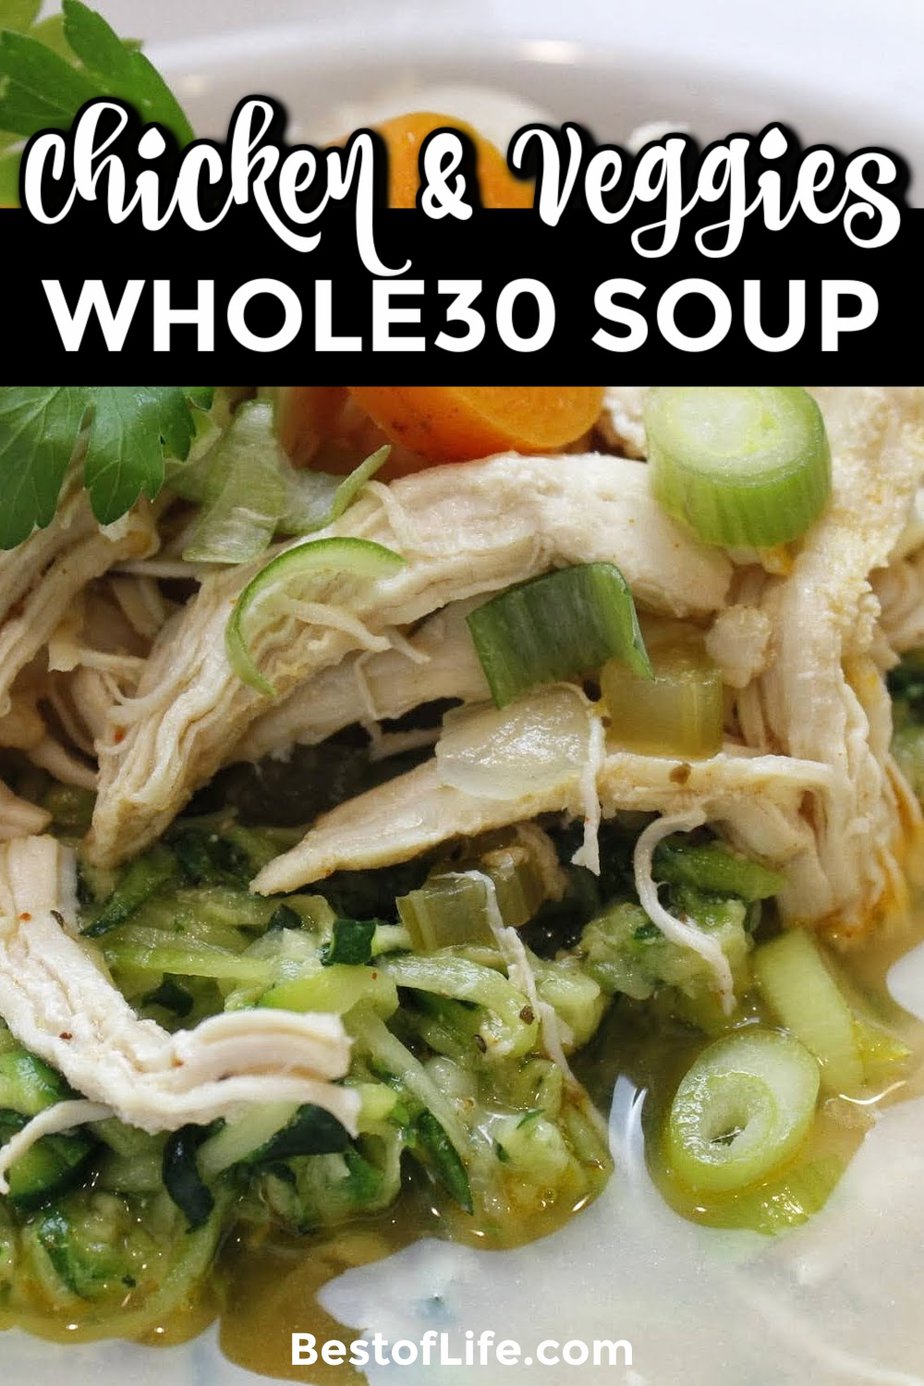 This delicious and healthy Whole30 Instant Pot chicken and vegetable soup is the perfect healthy Instant Pot recipe for your weight loss meal planning. Whole30 Instant Pot Recipes | Whole30 Chicken Soup Instant Pot | Instant Pot Soup Recipes | Healthy Soup Recipes | Easy Dinner Recipes | Healthy Dinner Recipes | Weight Loss Instant Pot Recipes #whole30 #instantpot